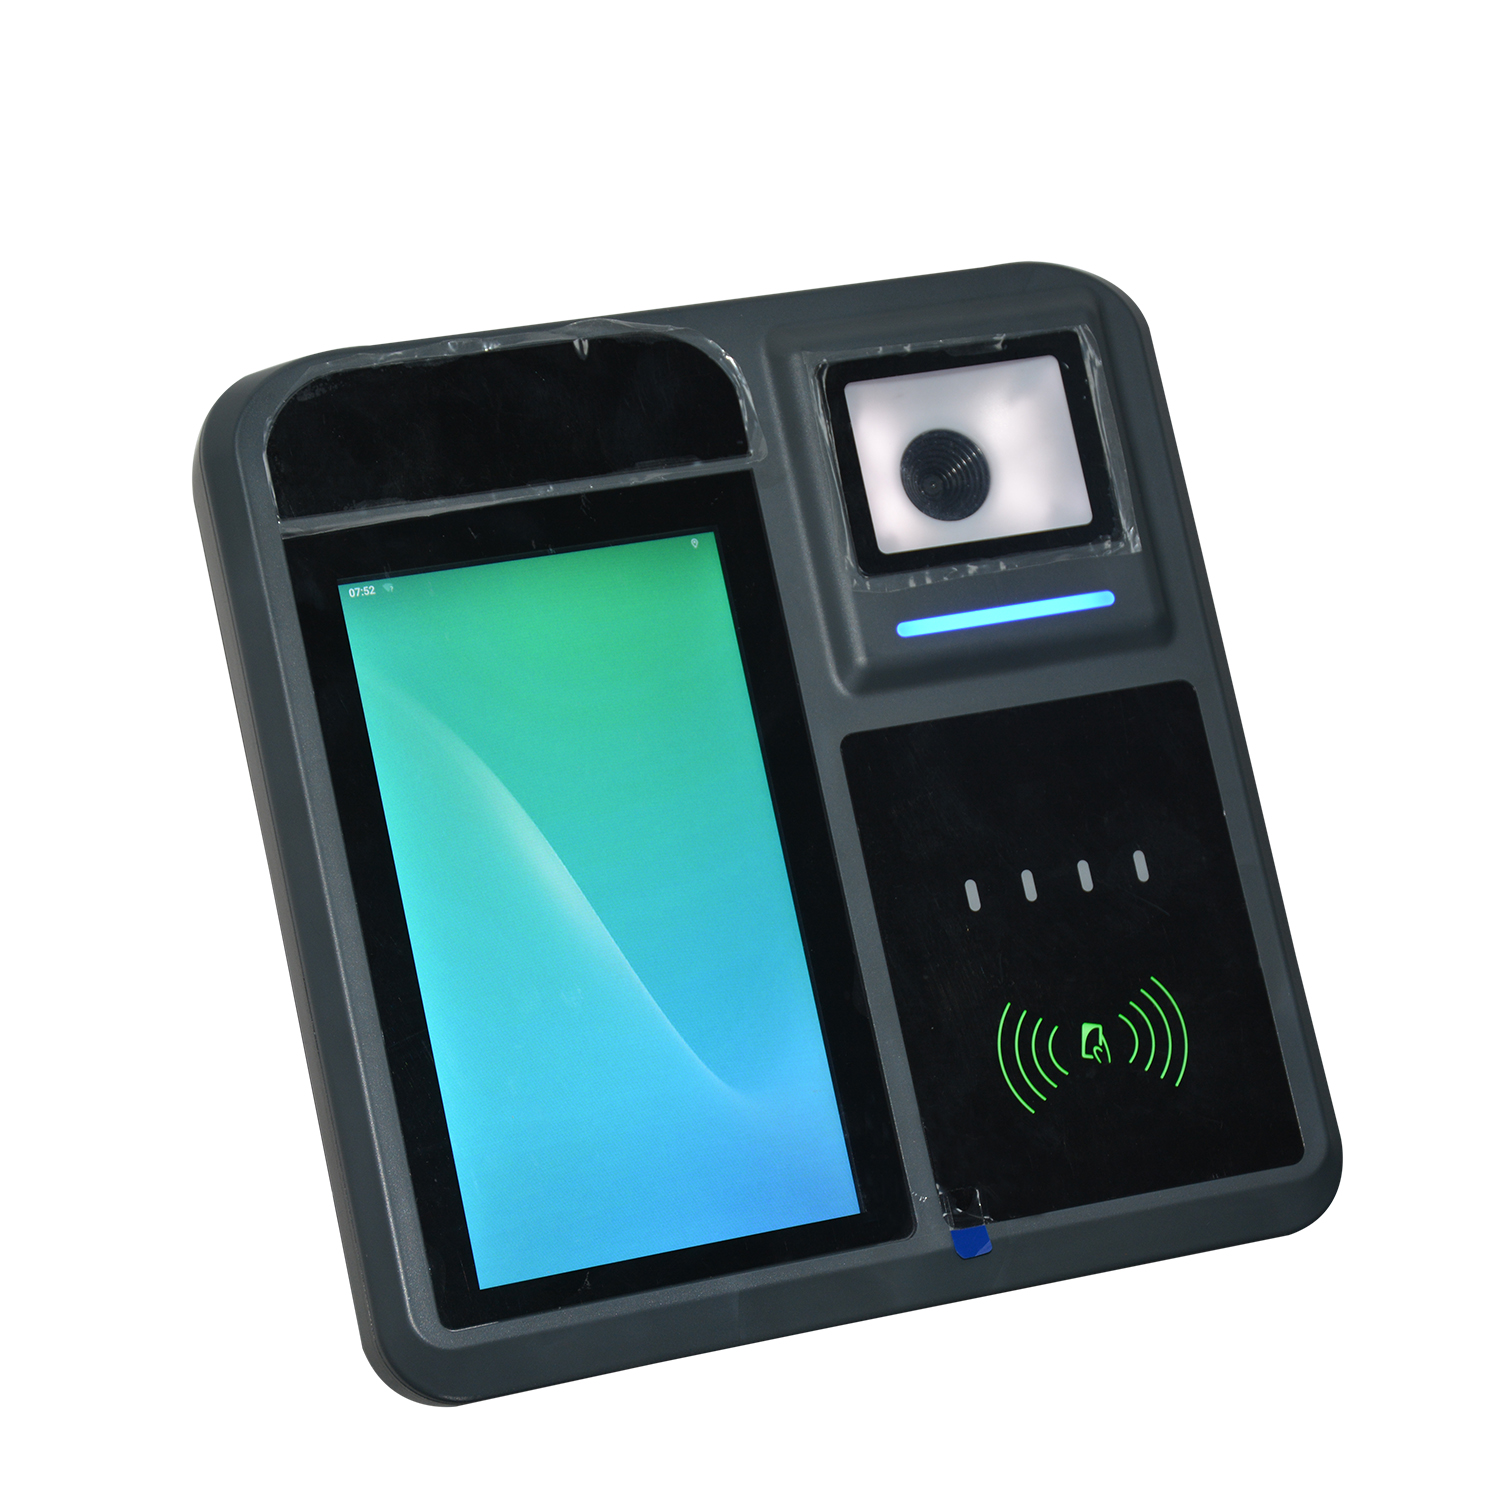 HCCTG UnionPay Android 9.0 Mifare NFC BUS Ticket Validation Machine With 2D Barcode Scanning P18-Q